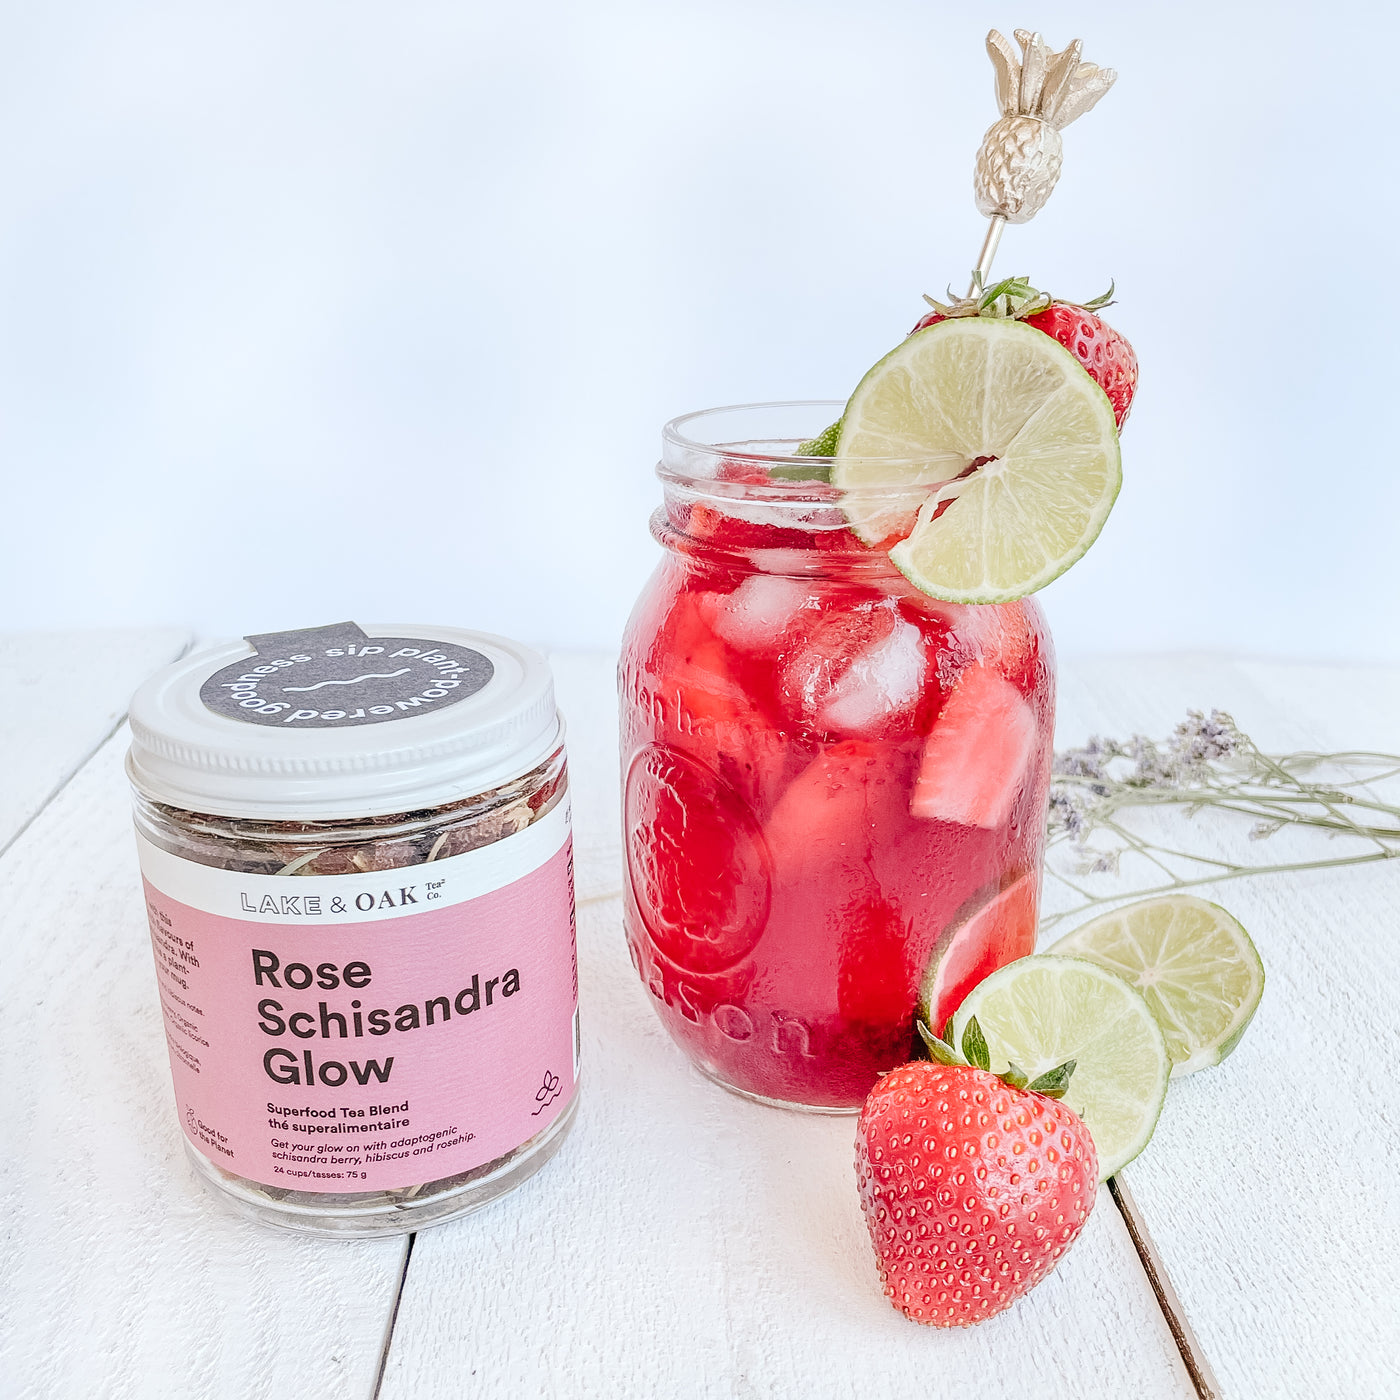 A juicy summer iced tea mocktail for healthy, glowing skin!